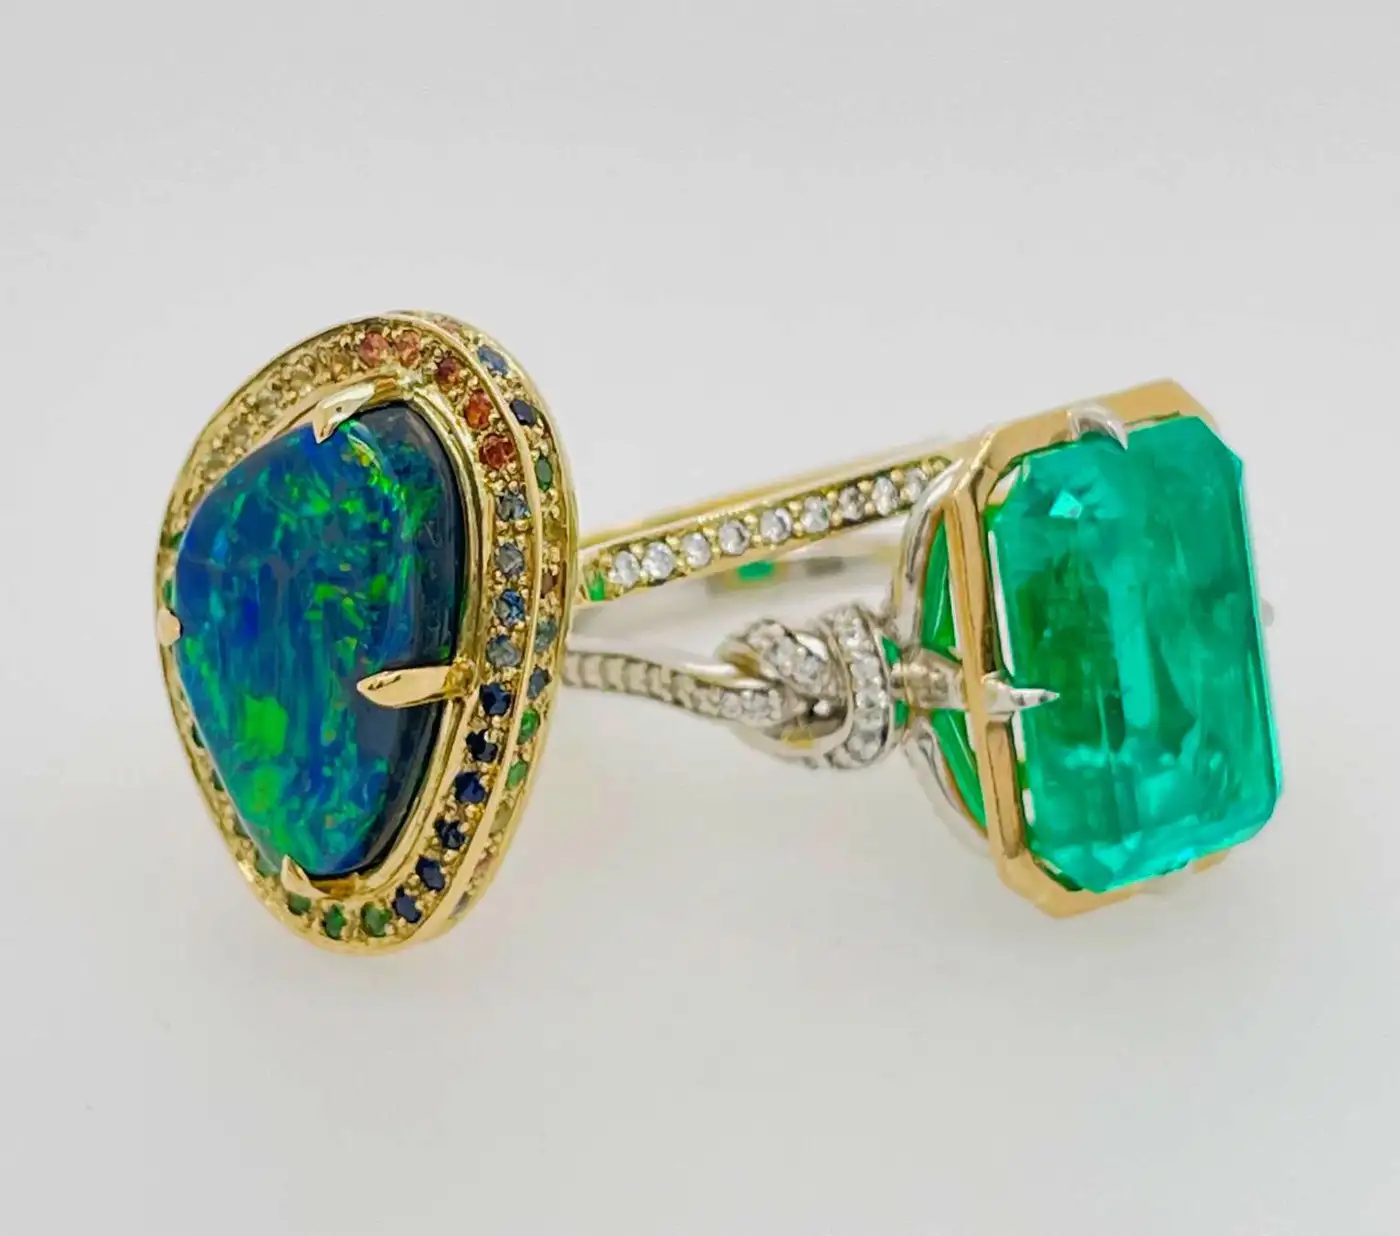 3ct-Emerald-in-Forget-Me-Knot-Ring-Platinum-and-22ct-Yellow-Gold-5.webp